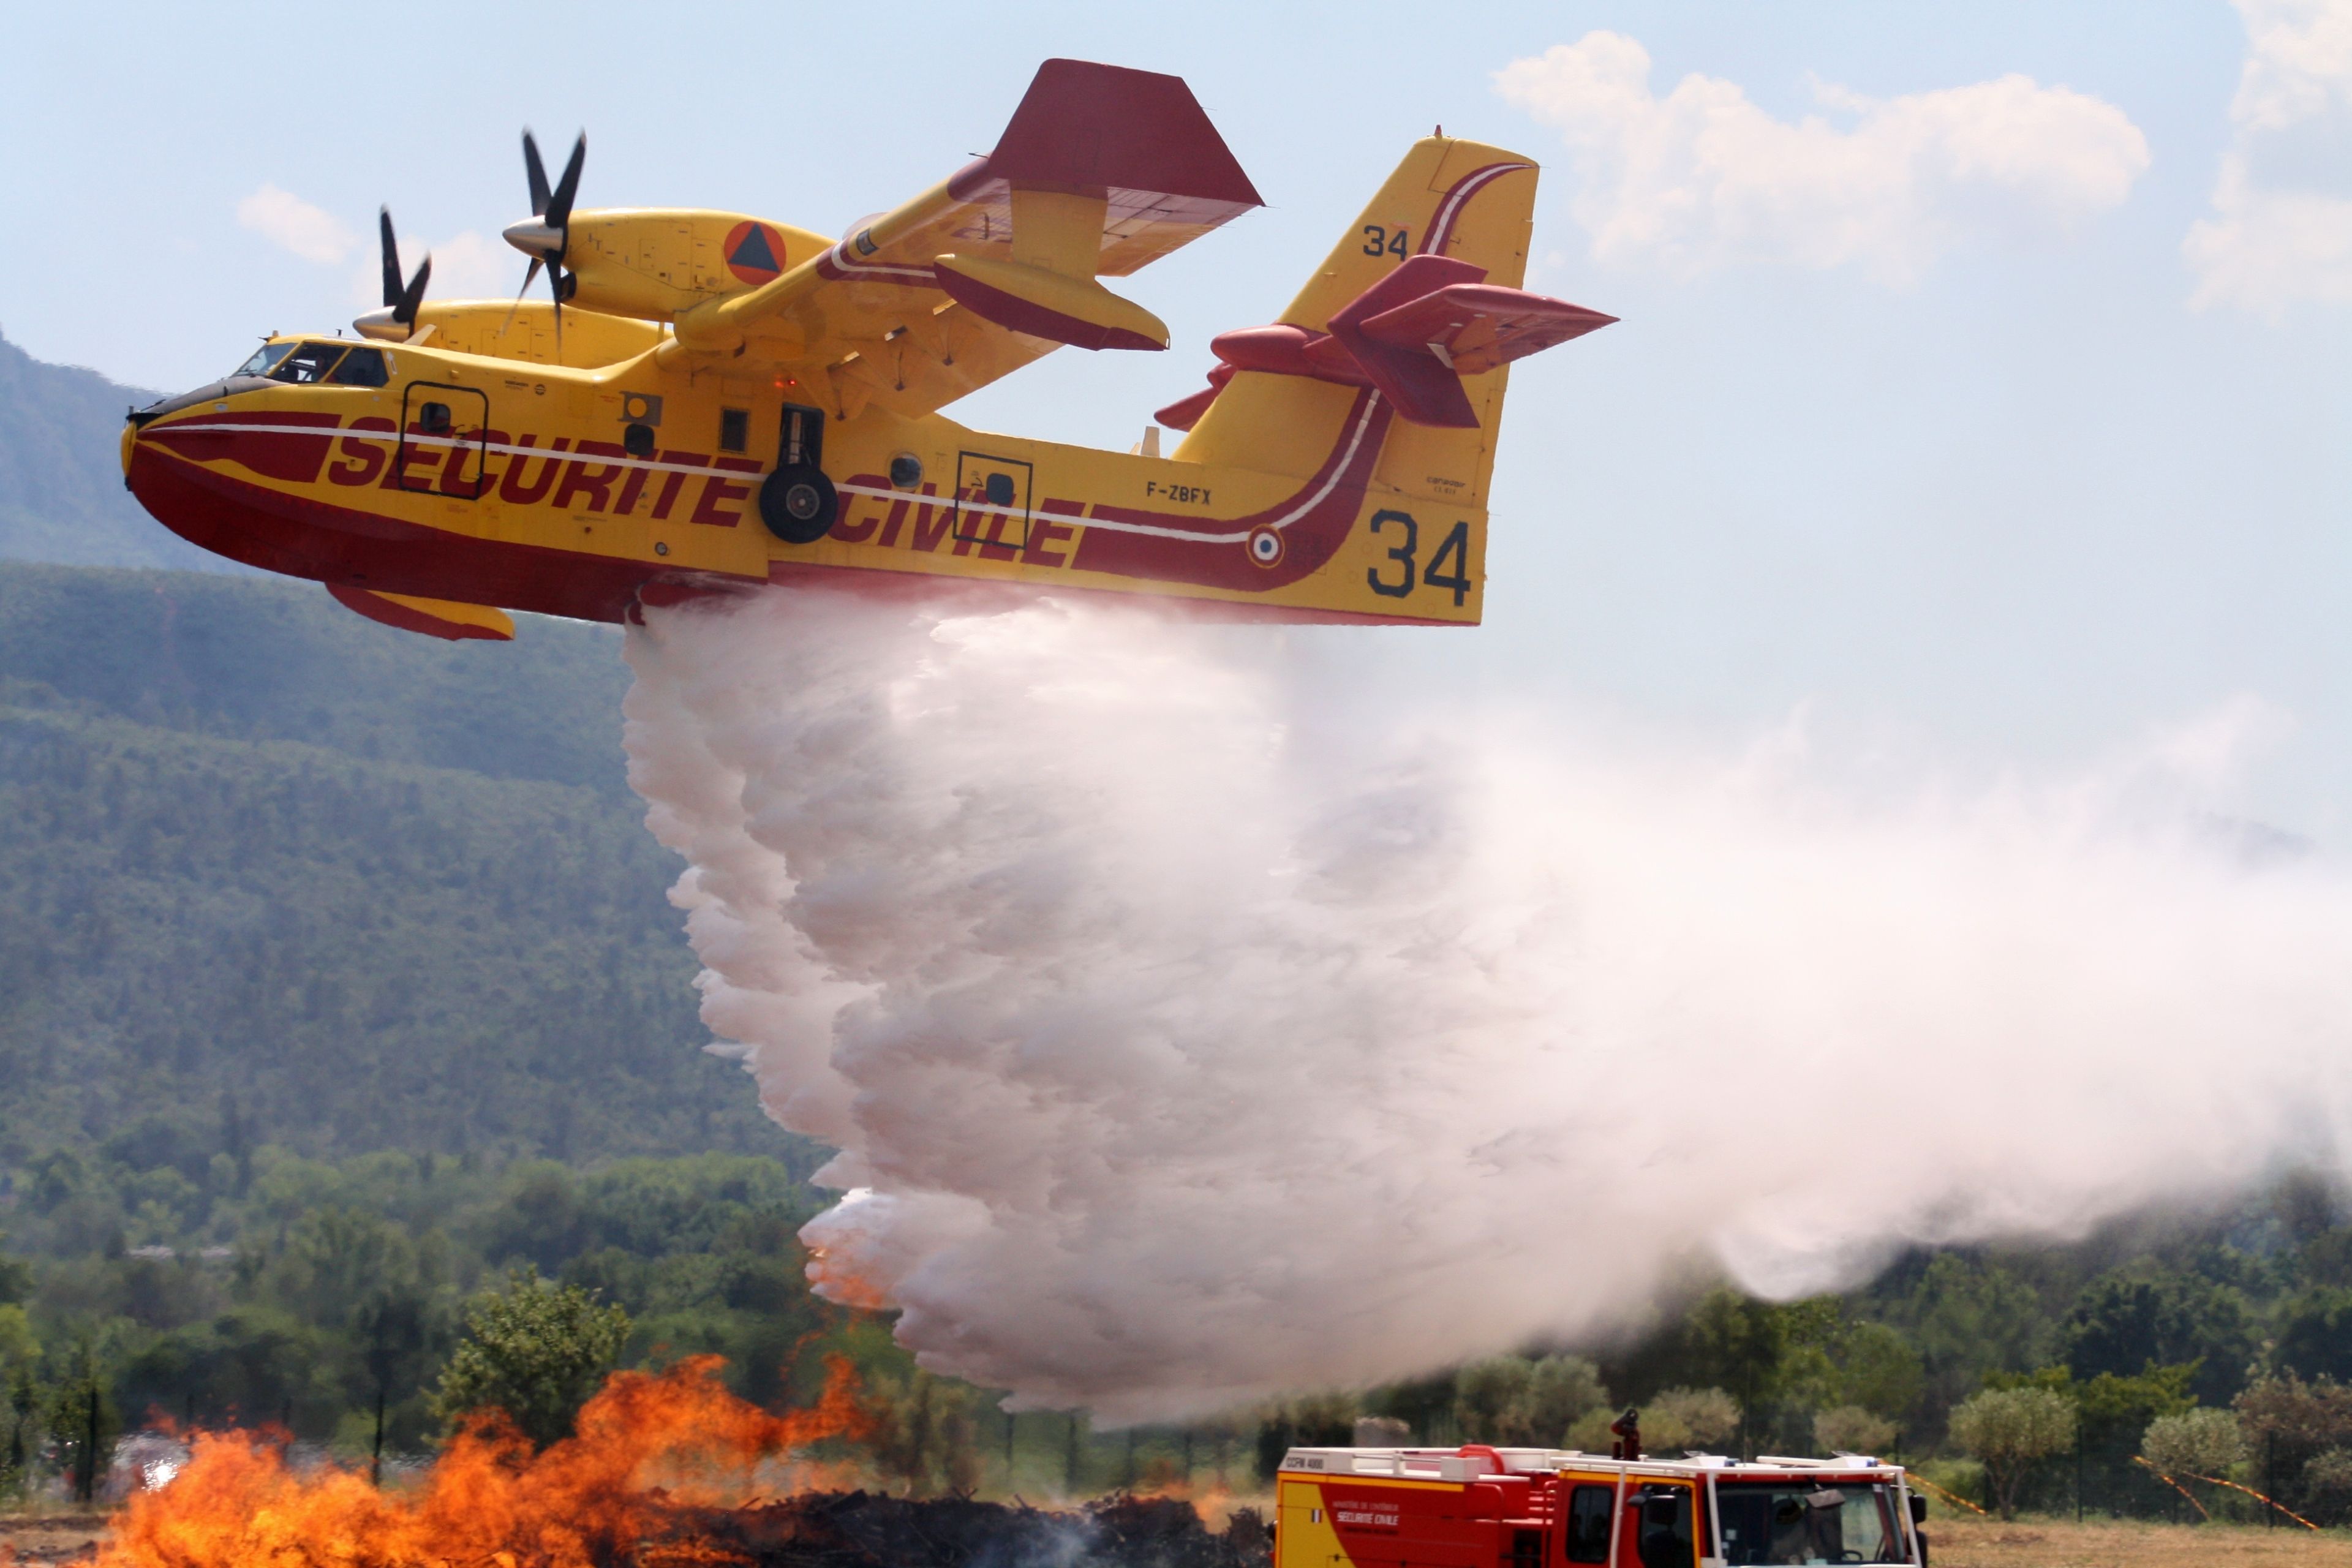 A Canadair aircraft being used to put out a wildfire.